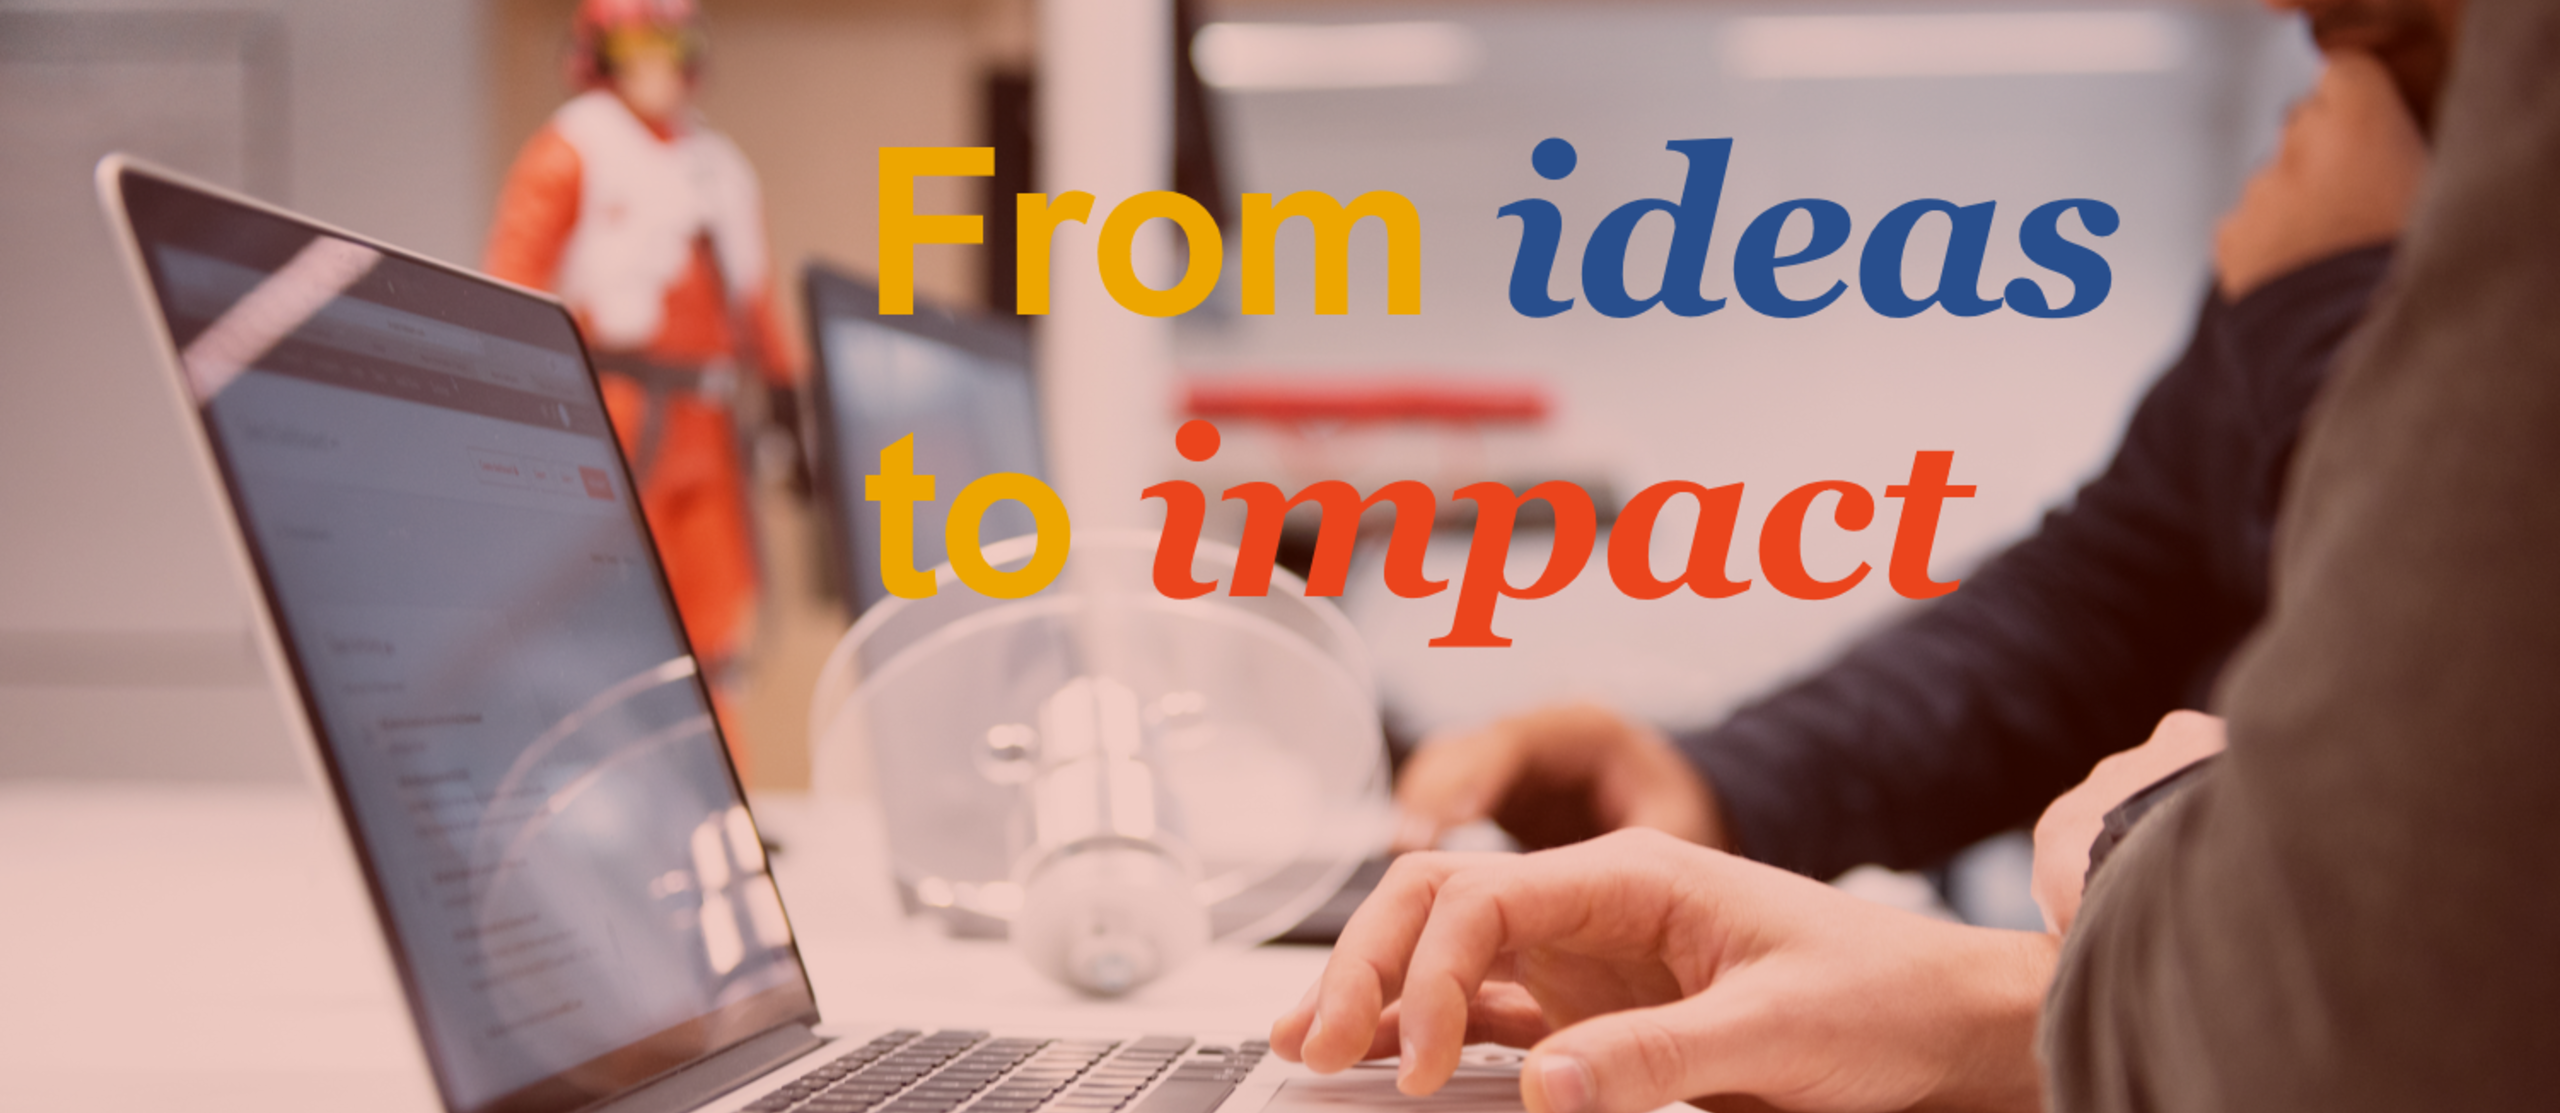 Slogan: From ideas to impact